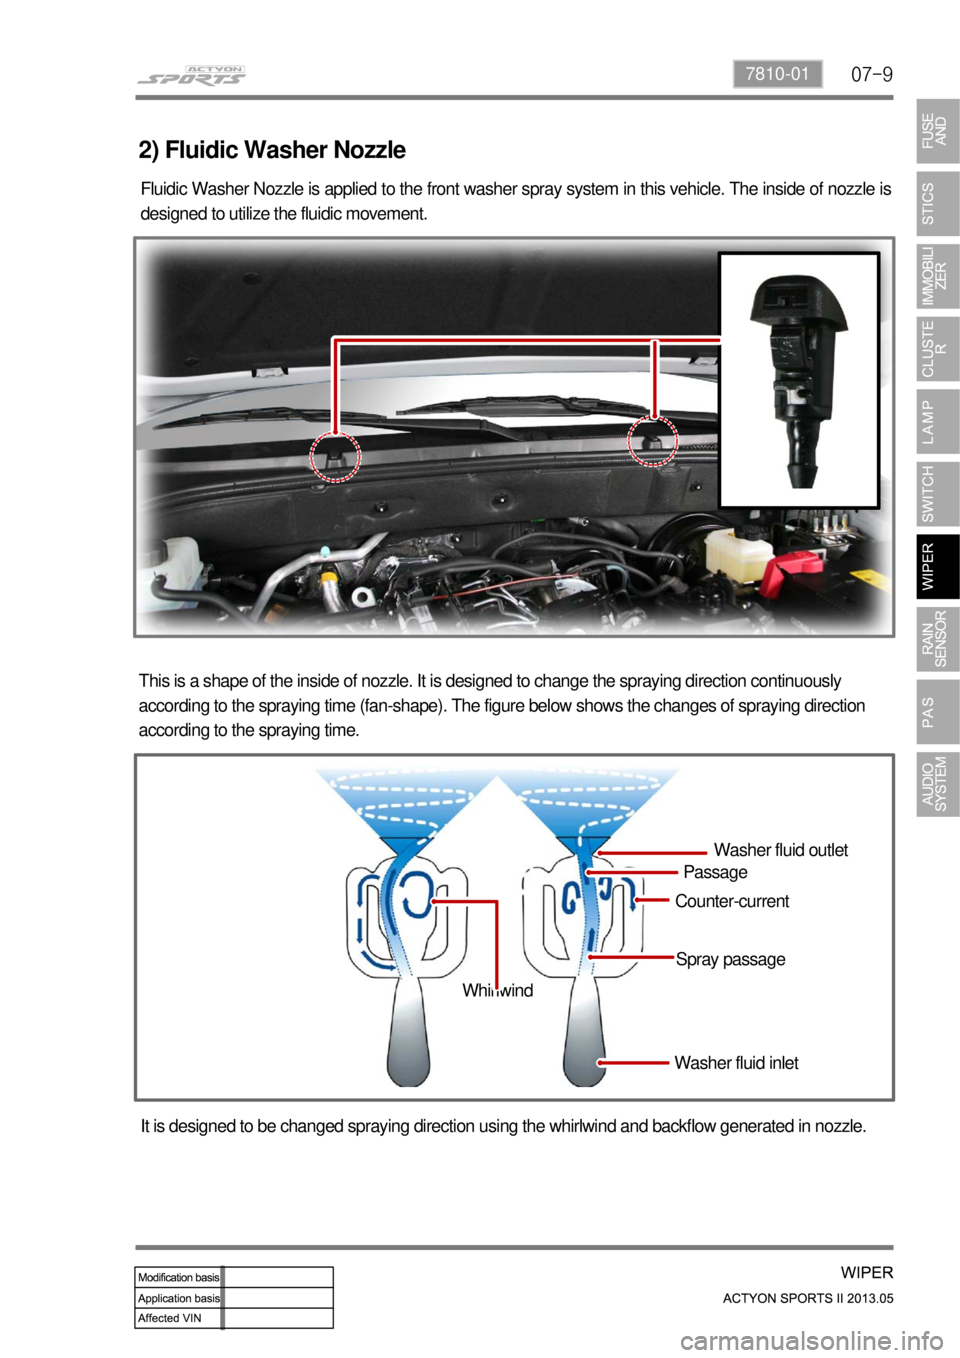 SSANGYONG NEW ACTYON SPORTS 2013  Service Manual 07-97810-01
2) Fluidic Washer Nozzle
Fluidic Washer Nozzle is applied to the front washer spray system in this vehicle. The inside of nozzle is 
designed to utilize the fluidic movement.
This is a sha